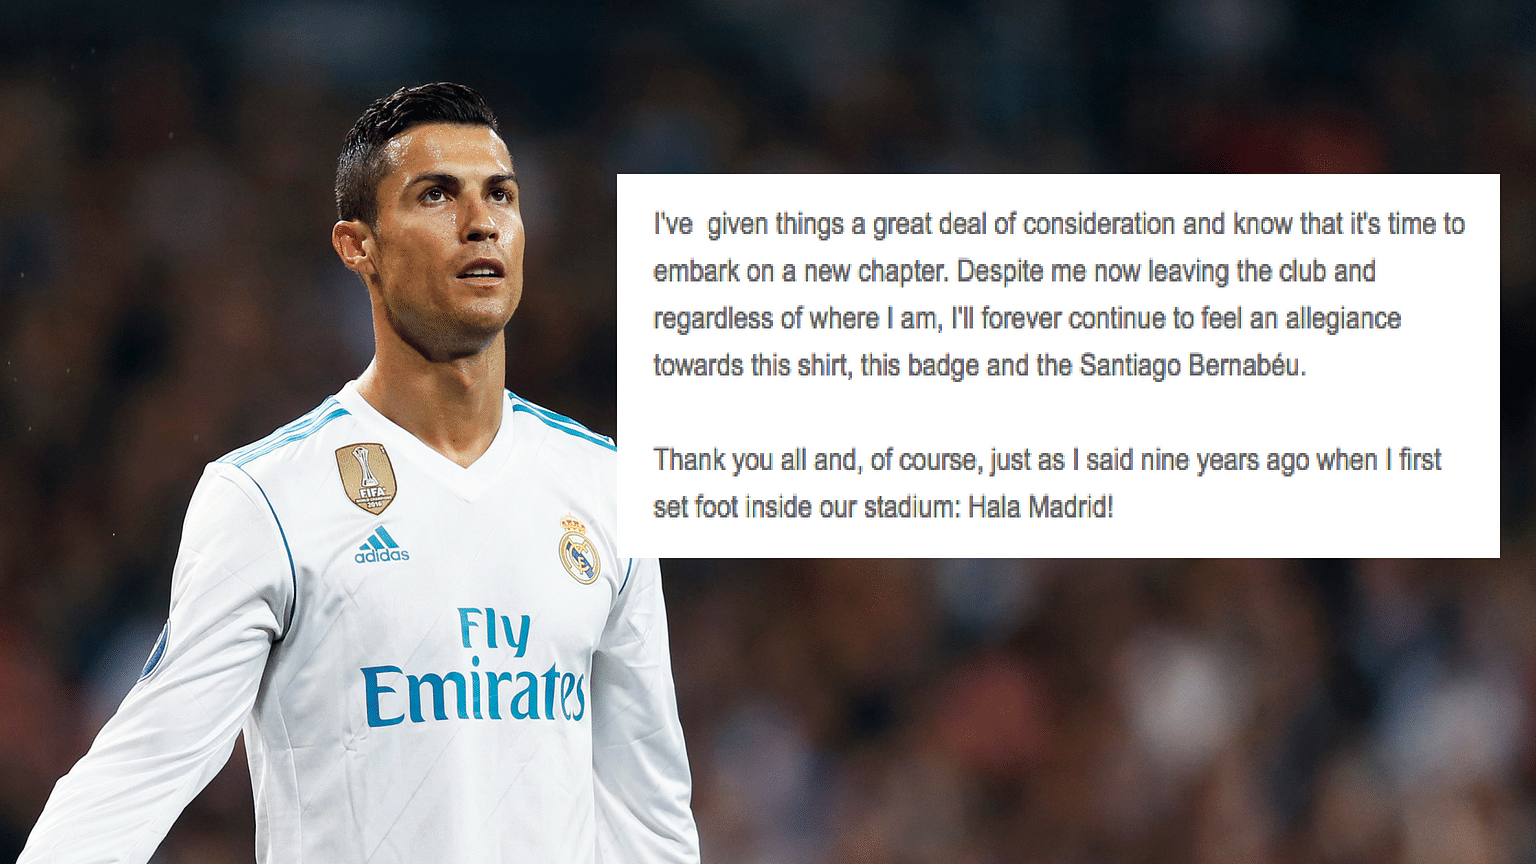 Full text of Cristiano Ronaldo’s farewell letter to his fans and club, Real Madrid